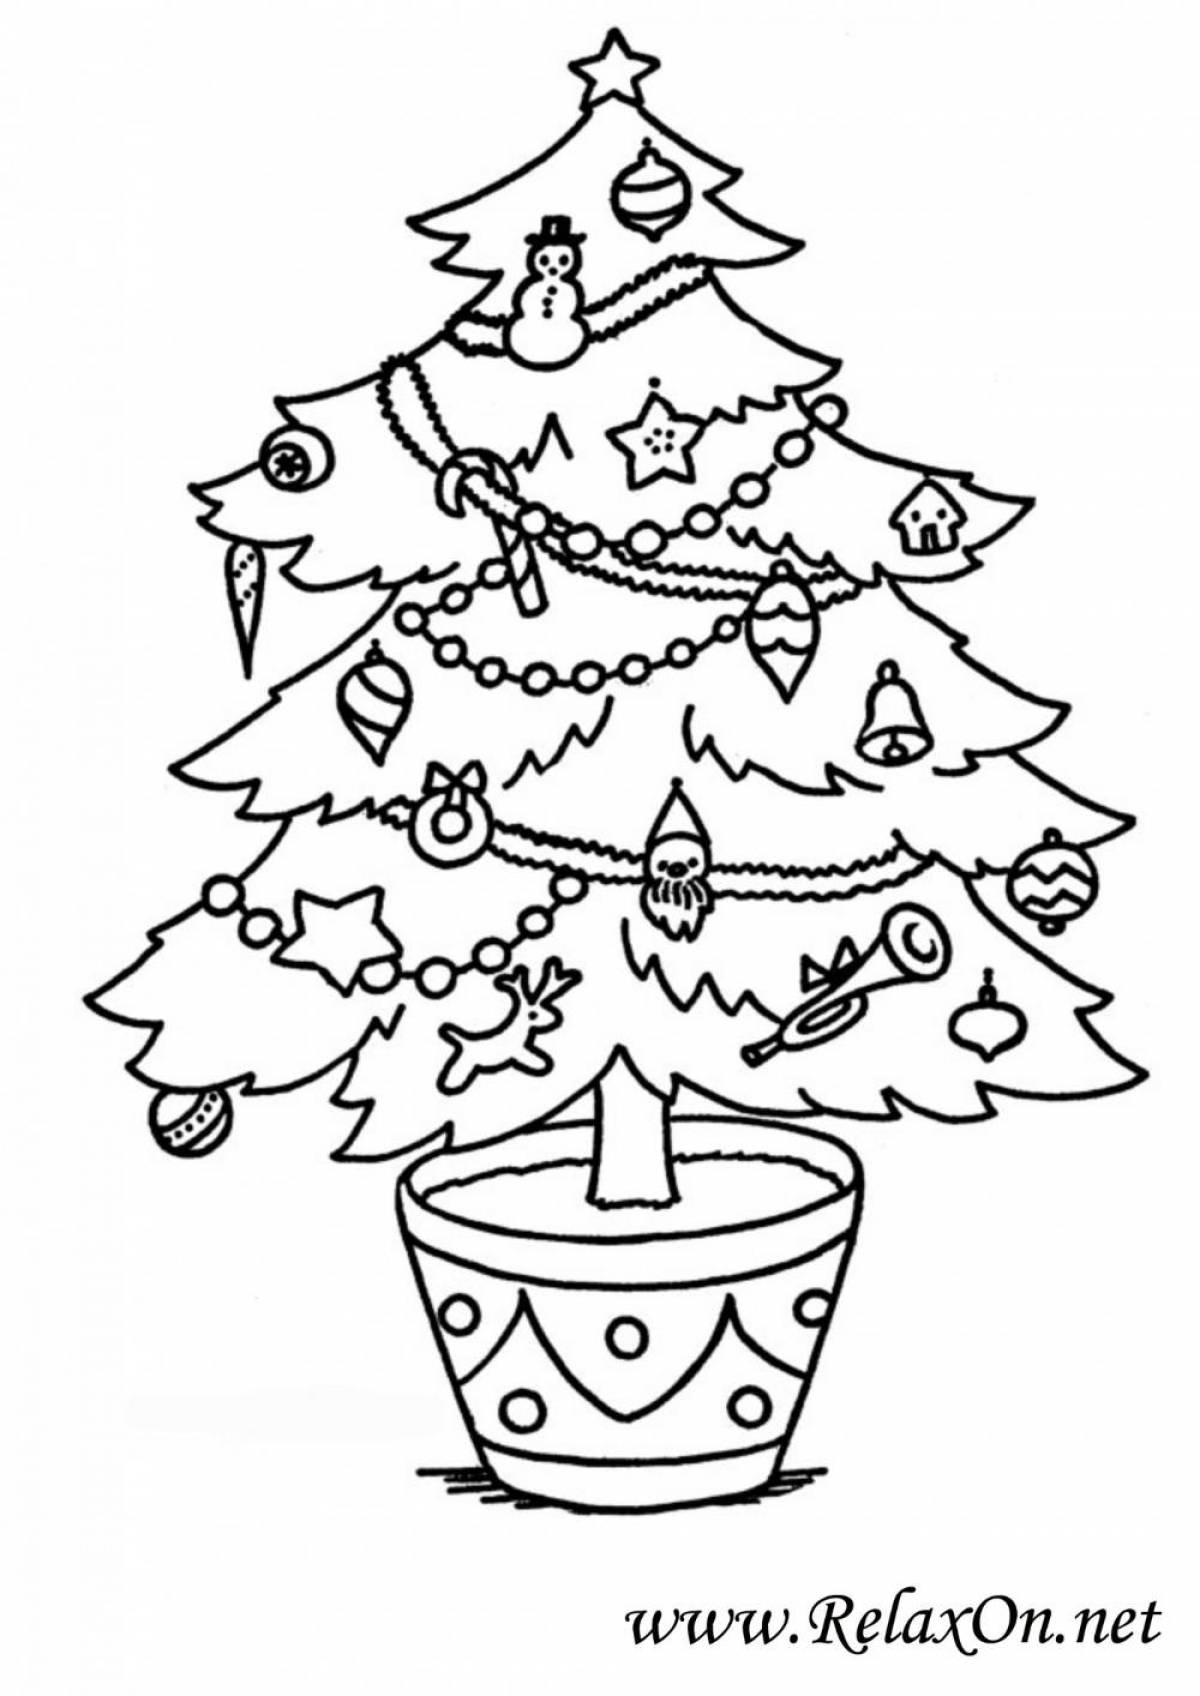 Shining Christmas tree coloring book for children 3-4 years old